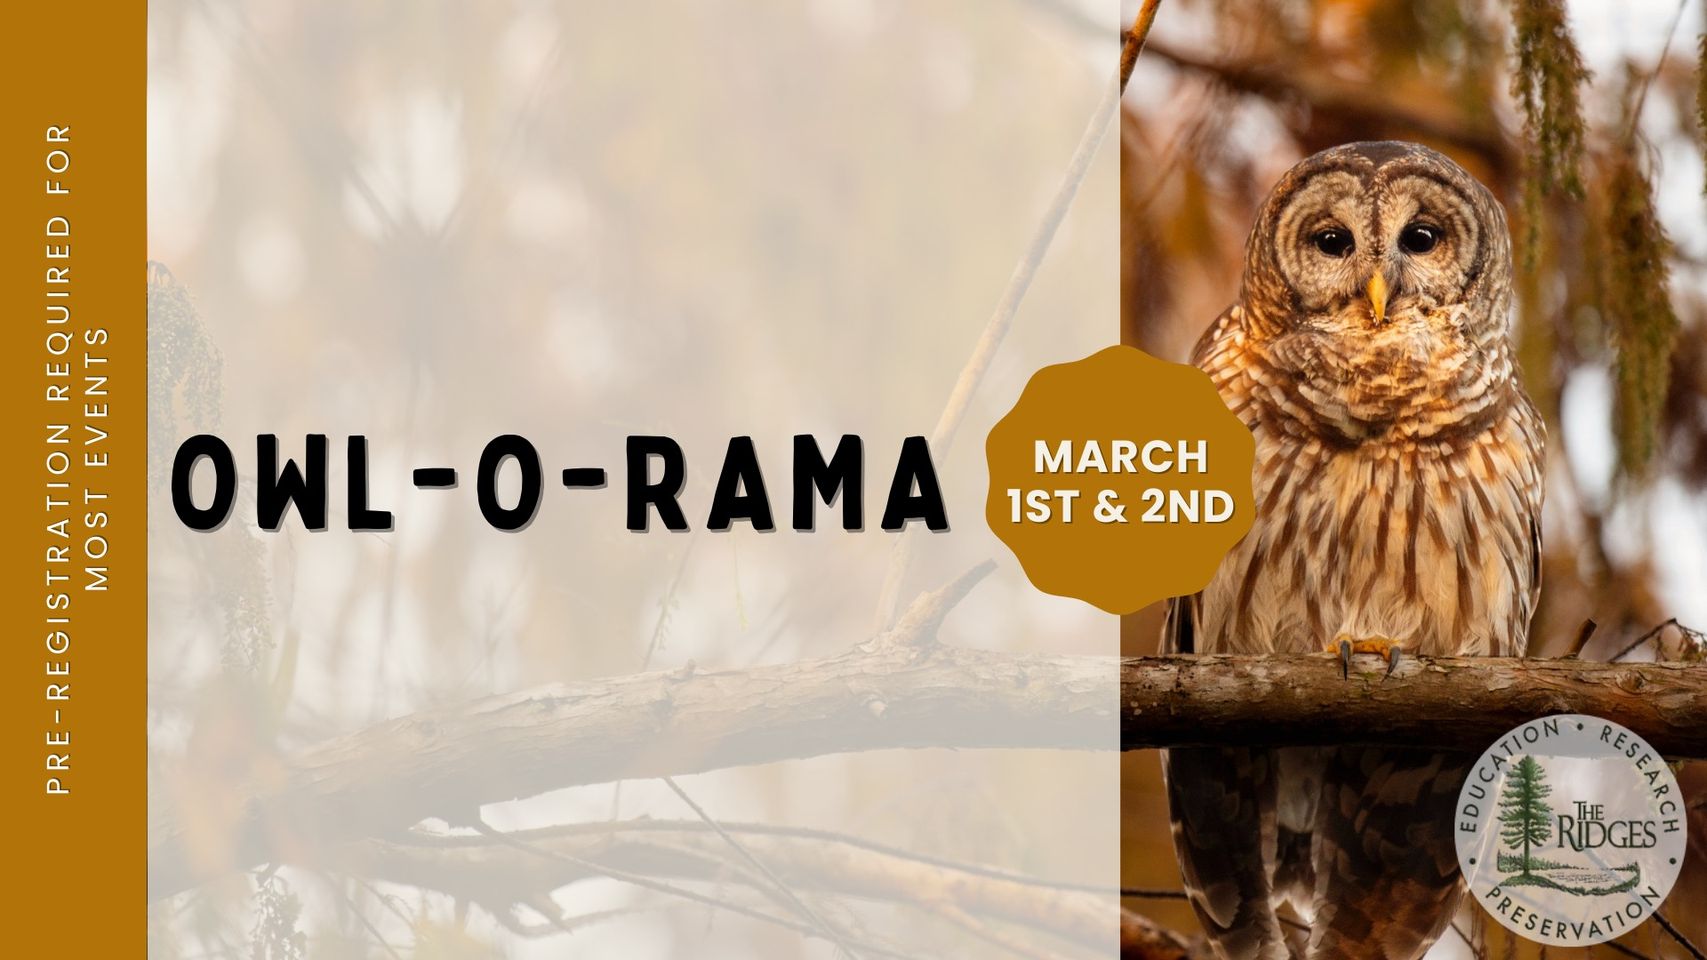 Promo for Owl-O-Rama with a photo of a large brown owl on a tree branch.